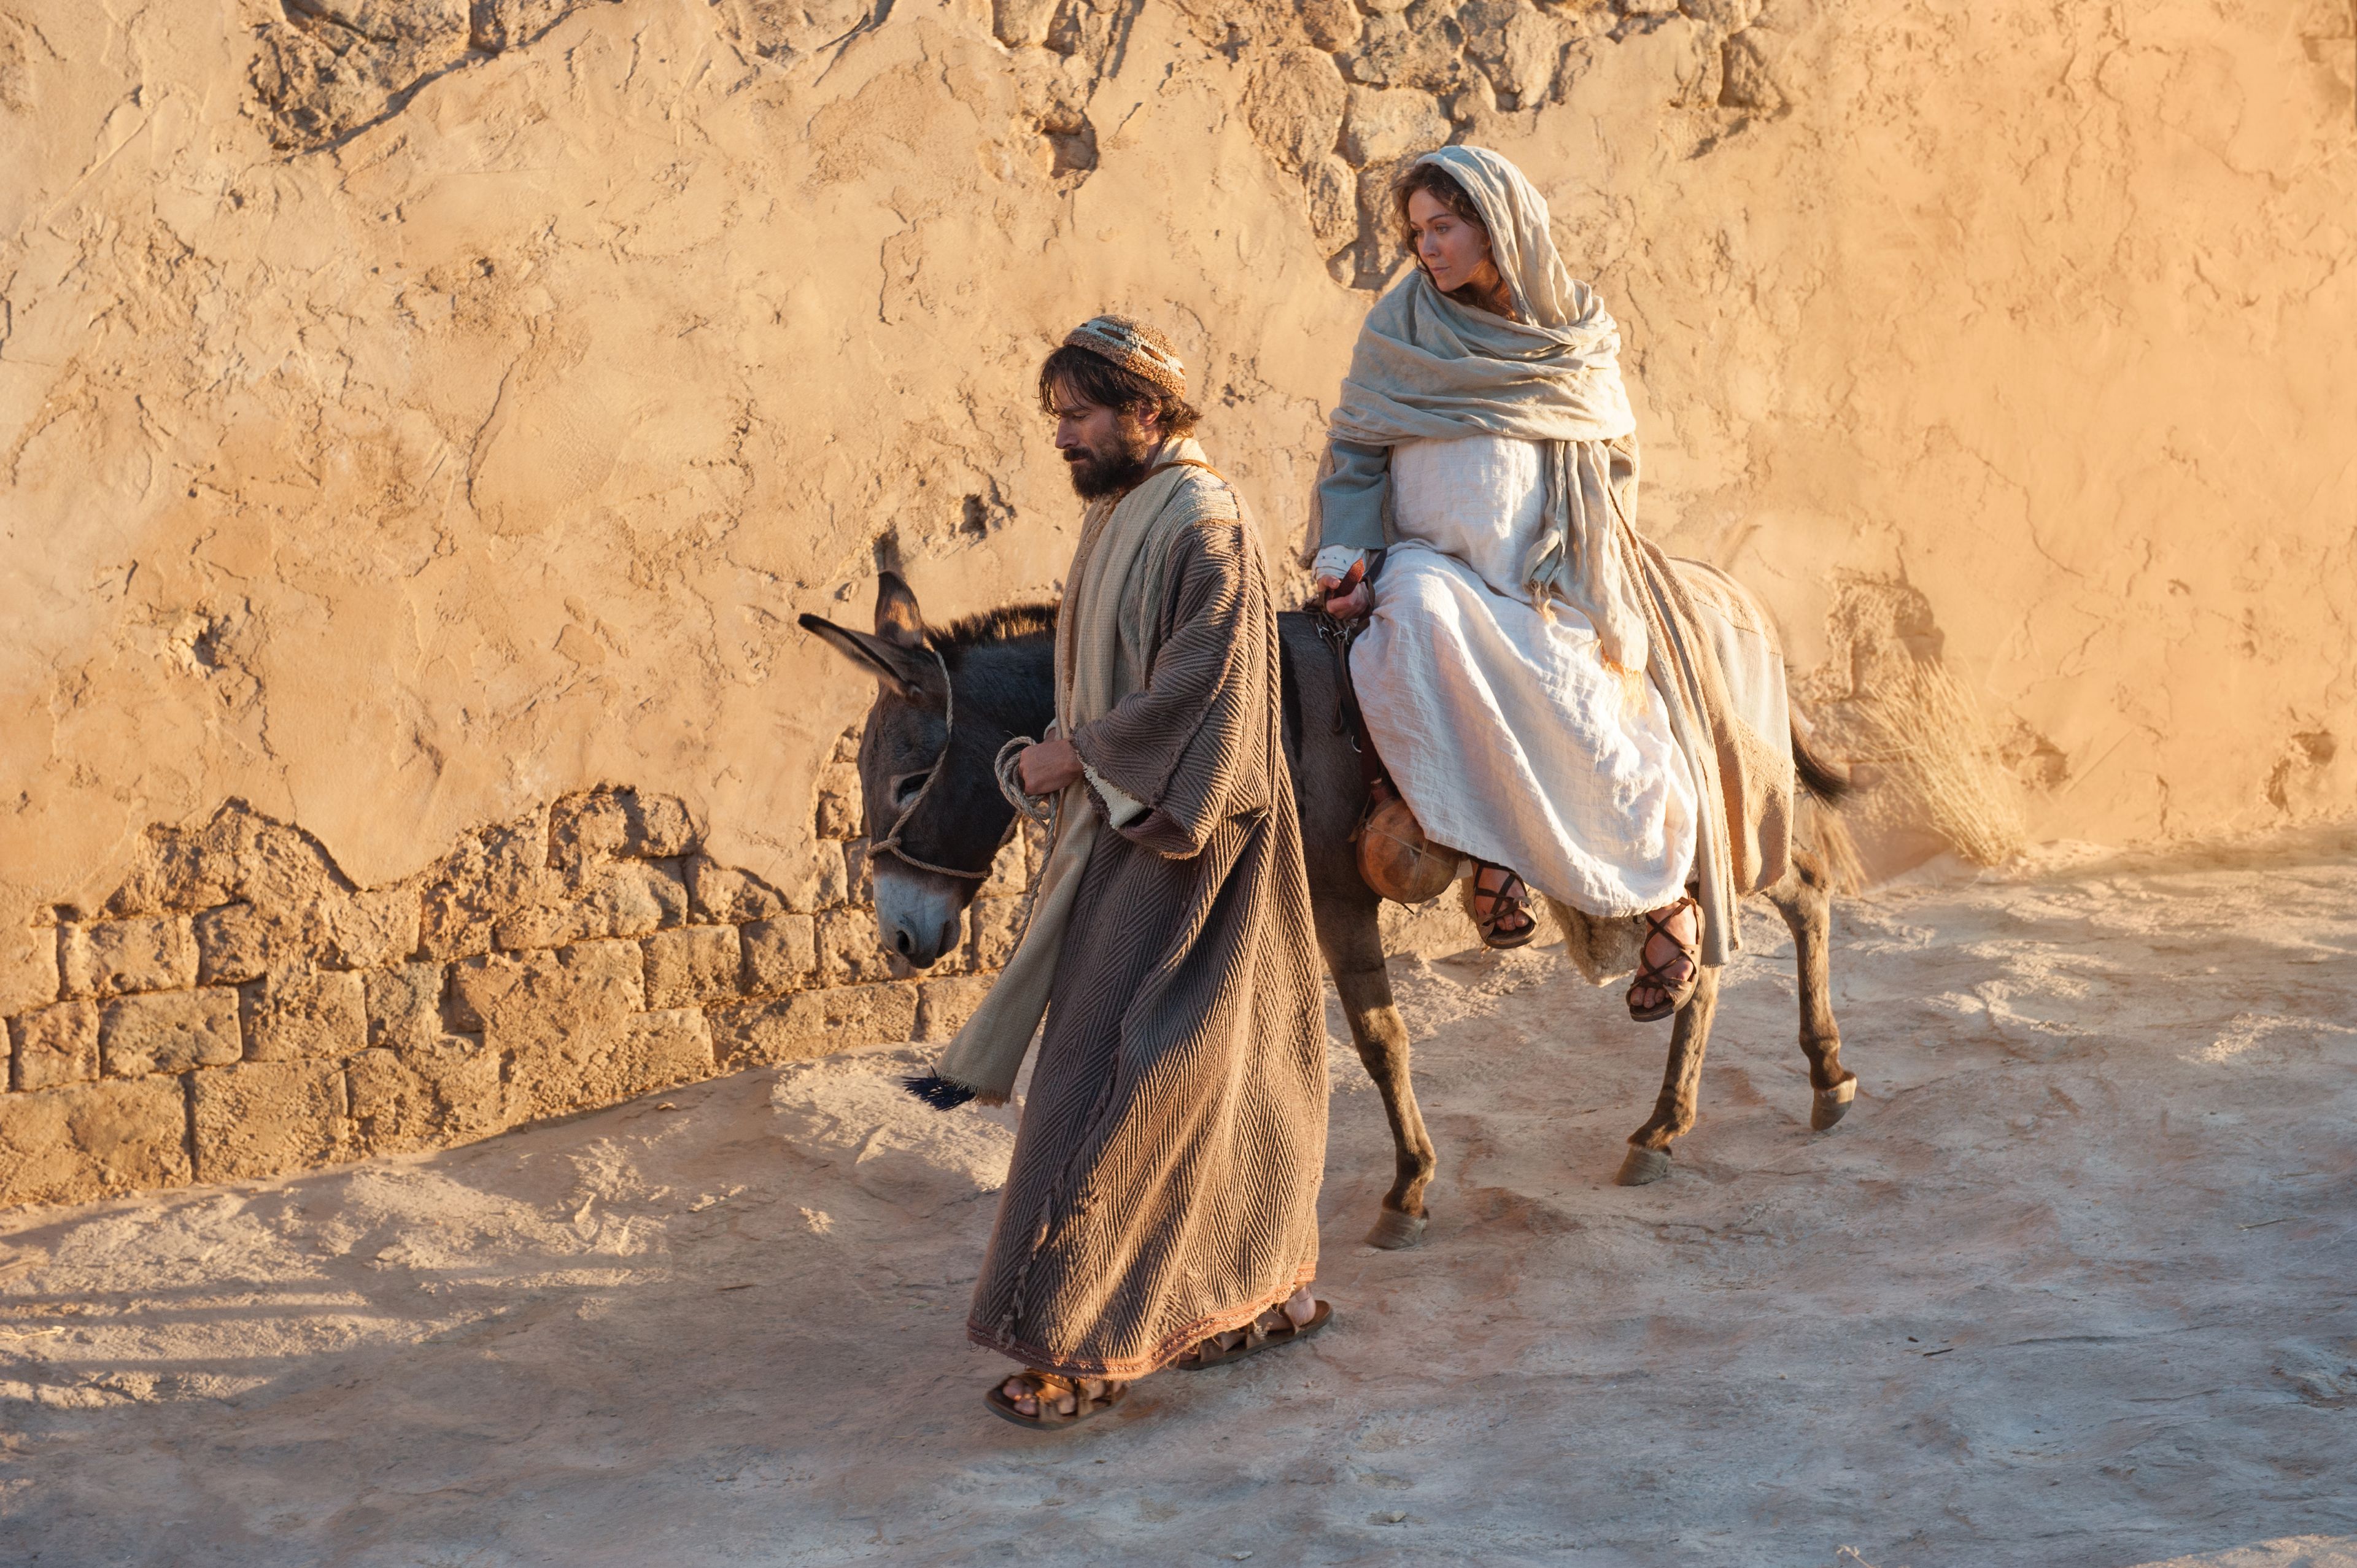 Mary and Joseph ride into Bethlehem at the end of their journey.